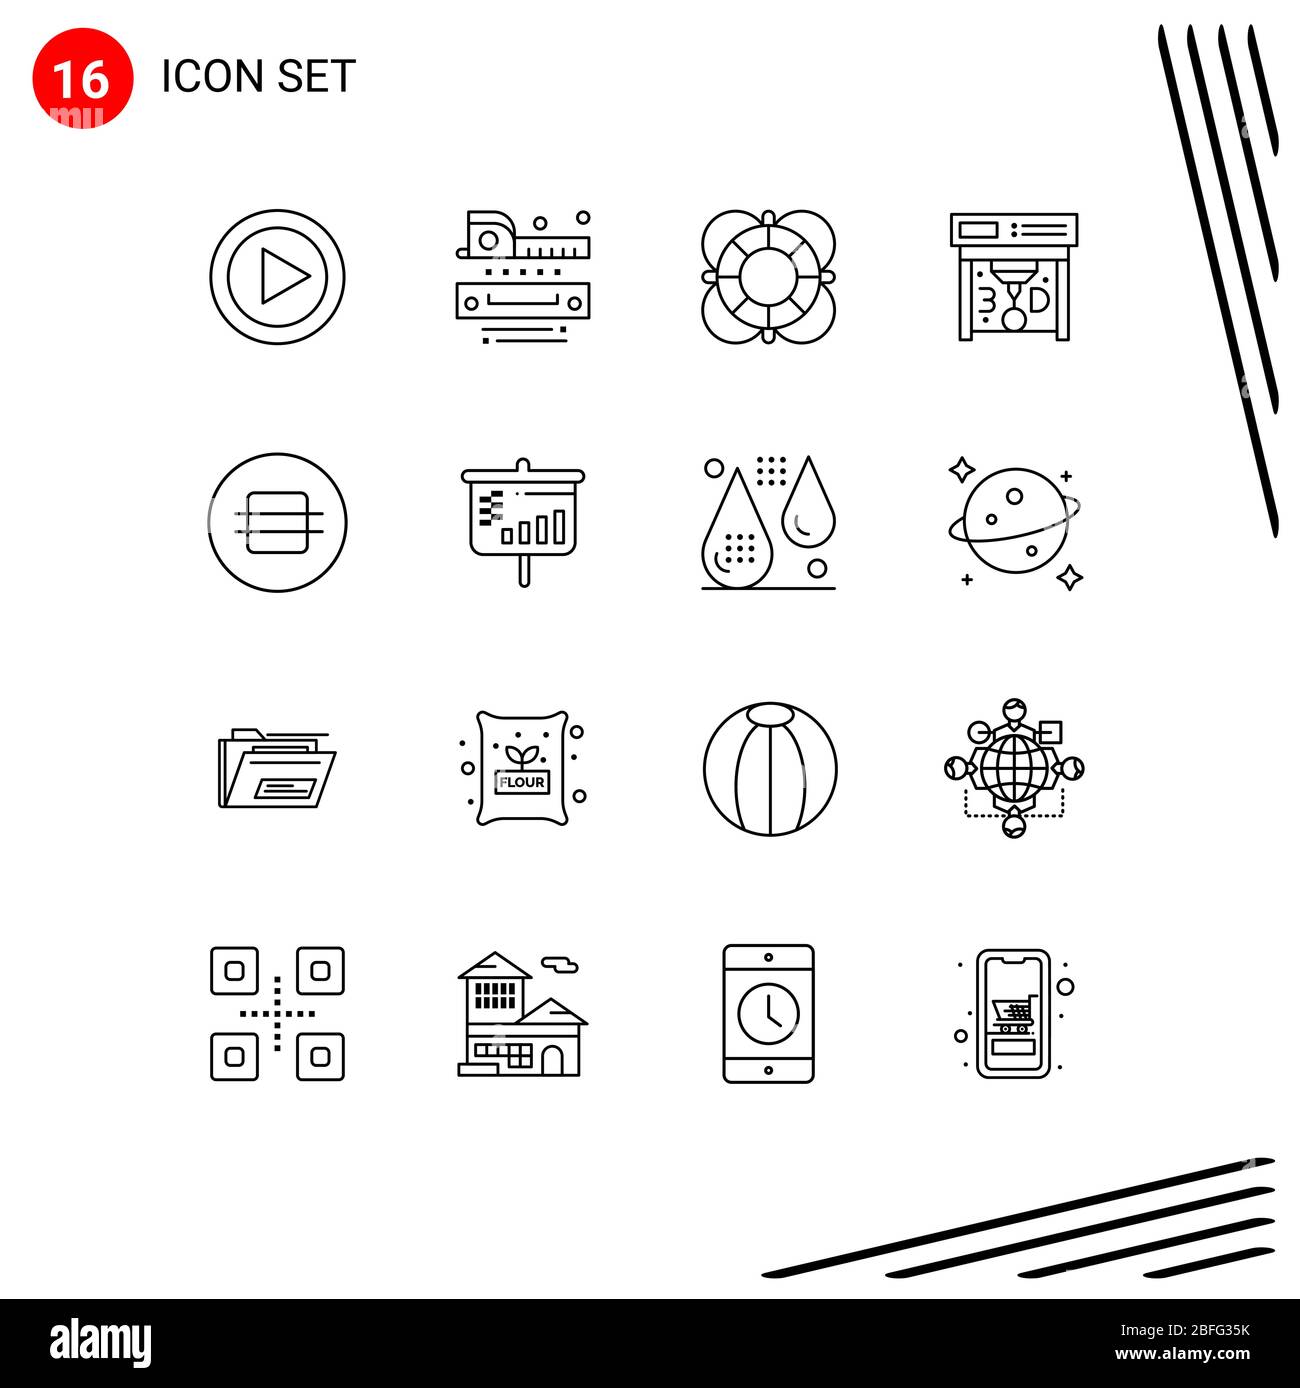 User Interface Pack of 16 Basic Outlines of diet, print, tapeline, printing, outline Editable Vector Design Elements Stock Vector